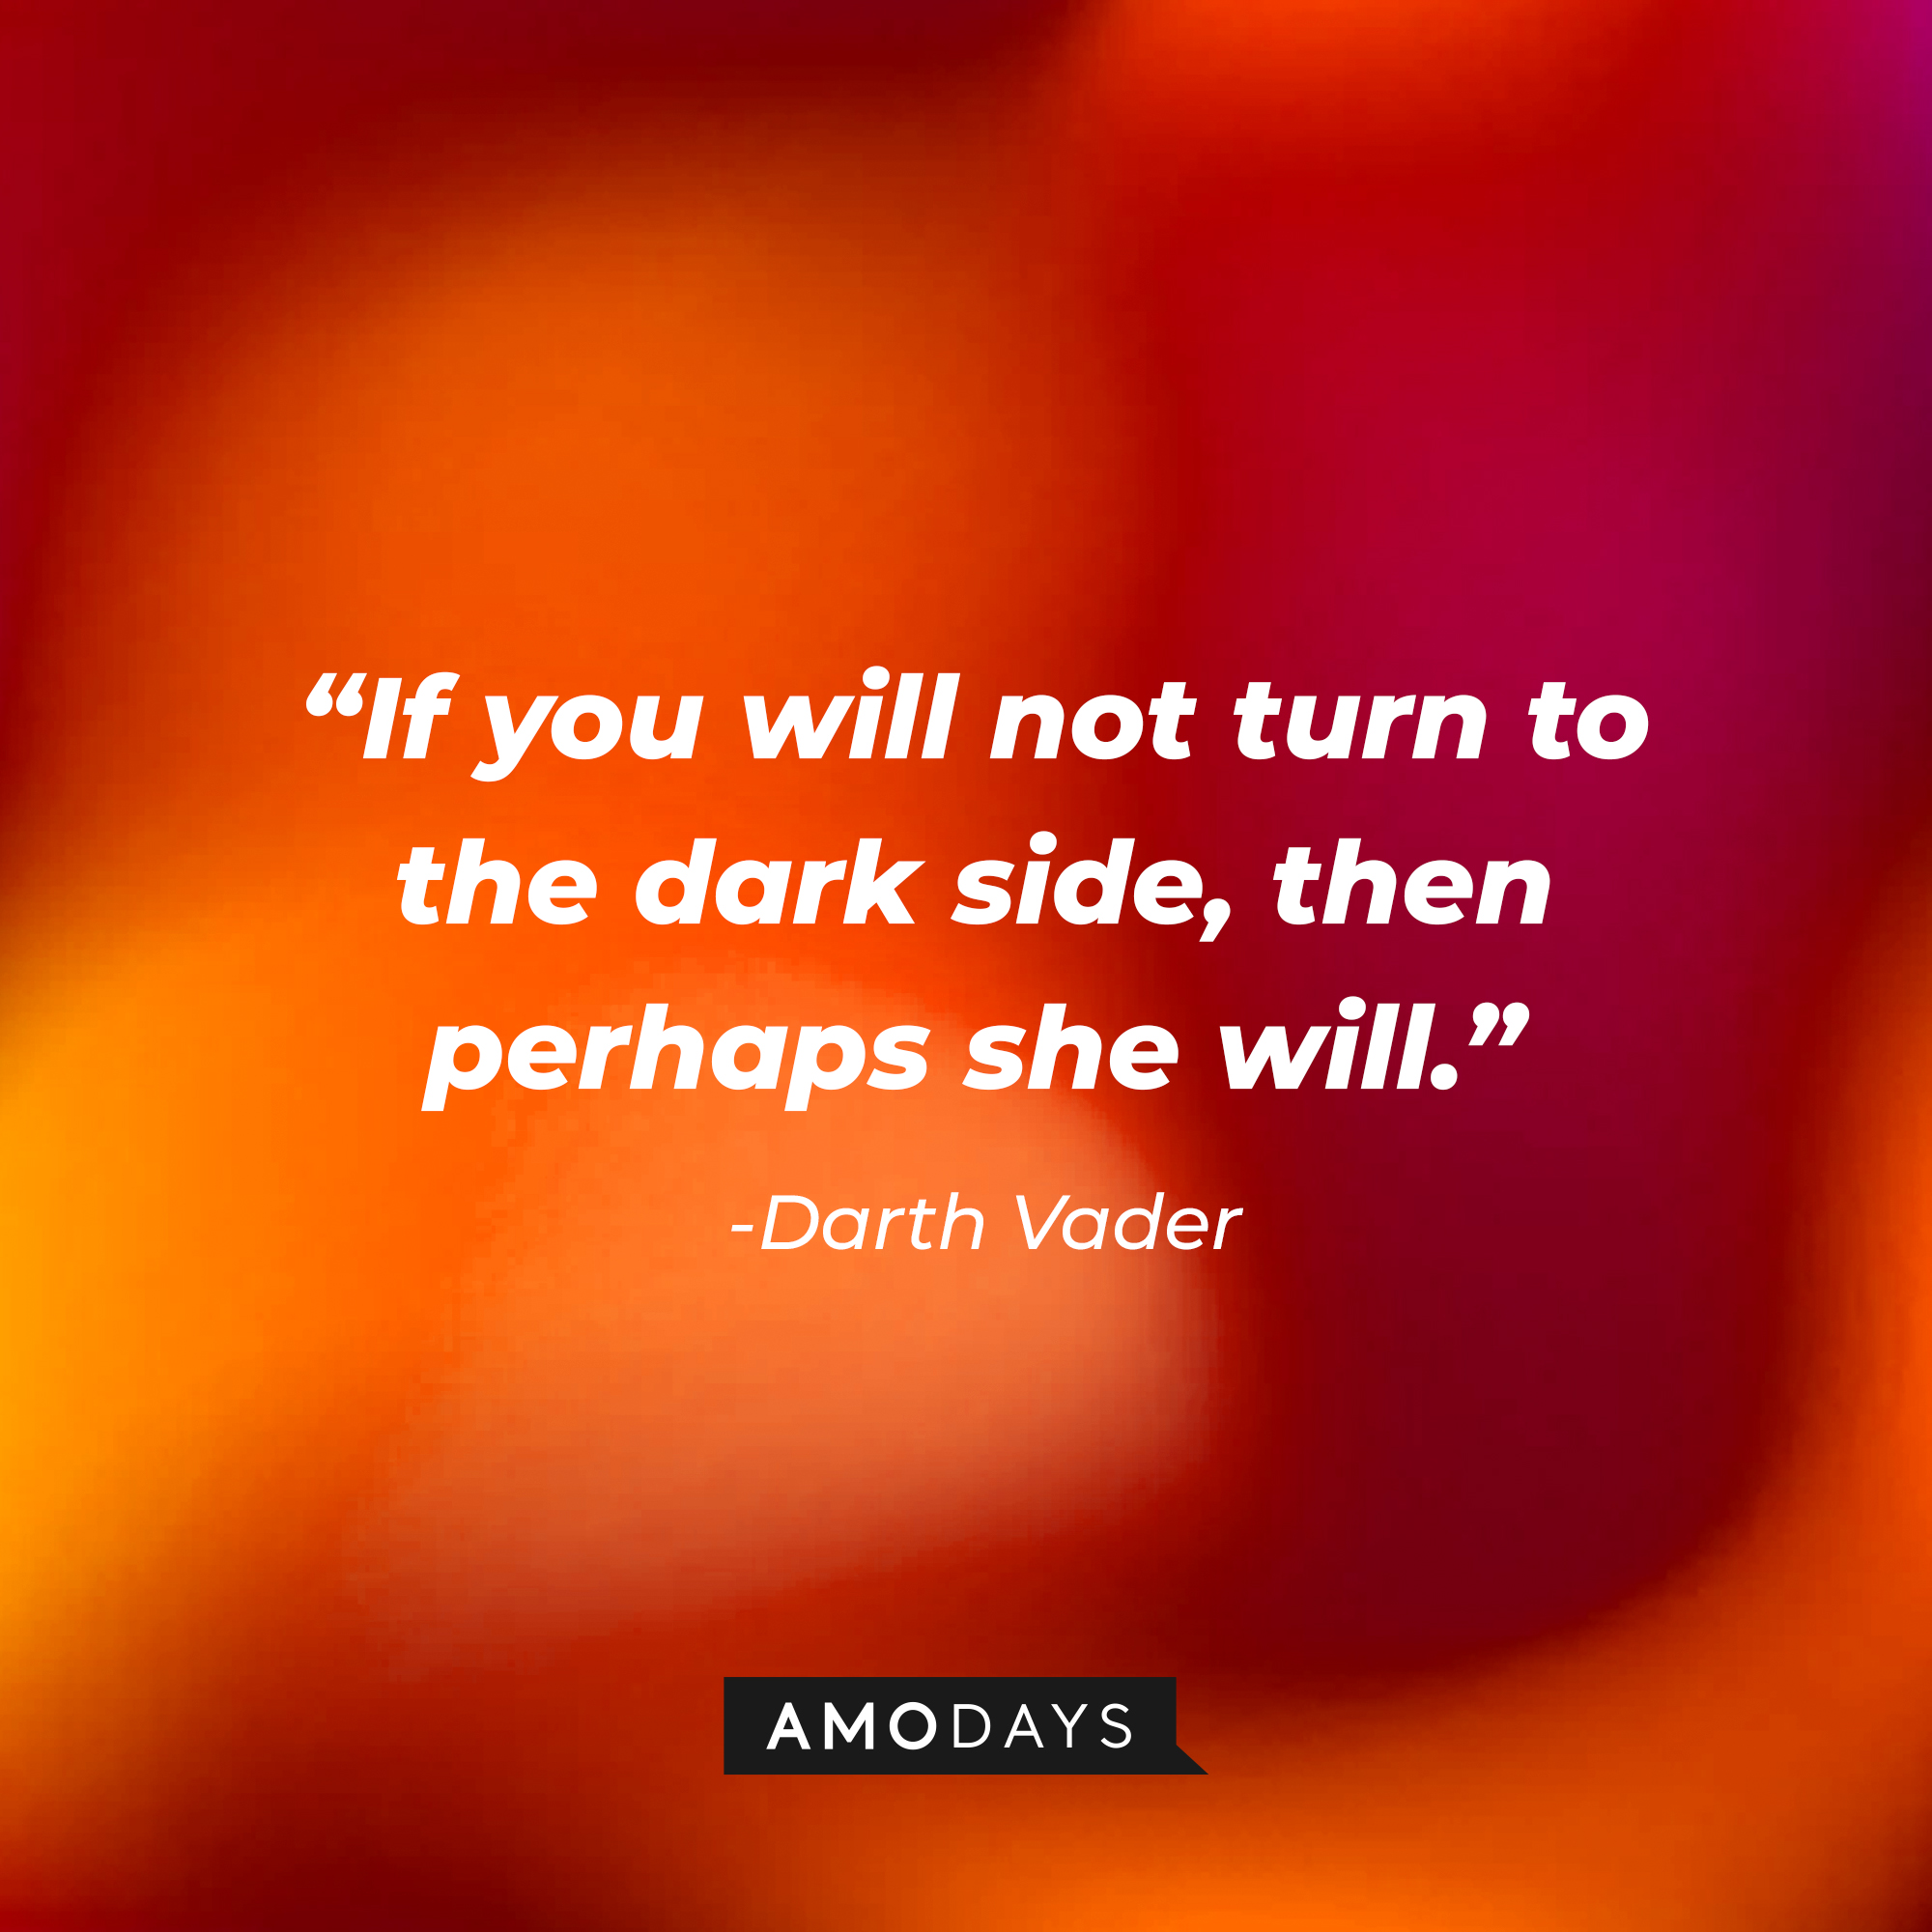 Darth Vader’s quote: "If you will not turn to the dark side, then perhaps she will.”  | Source: AmoDays